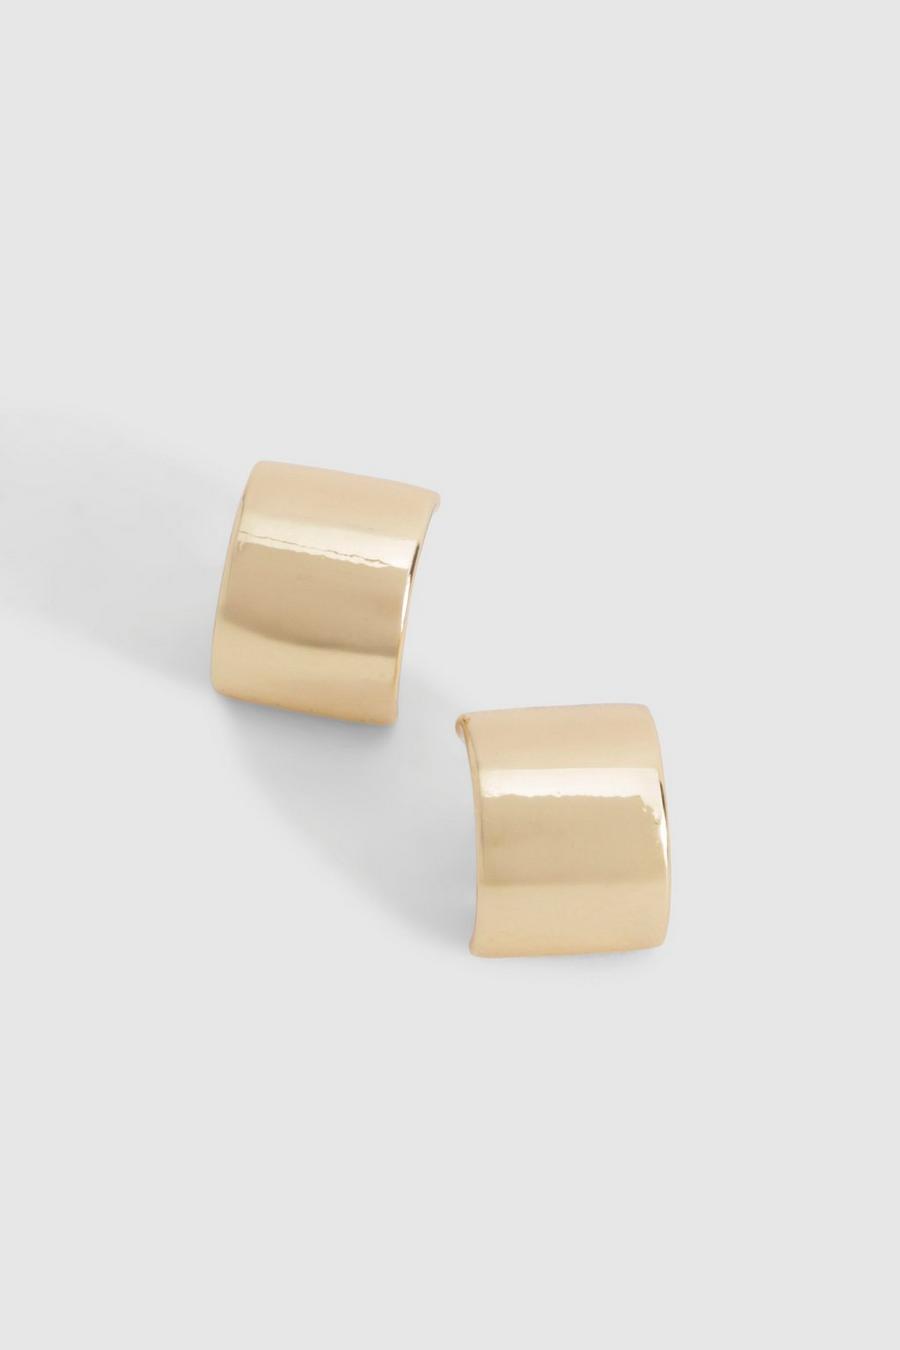 Gold Square Statement Stud Earrings 